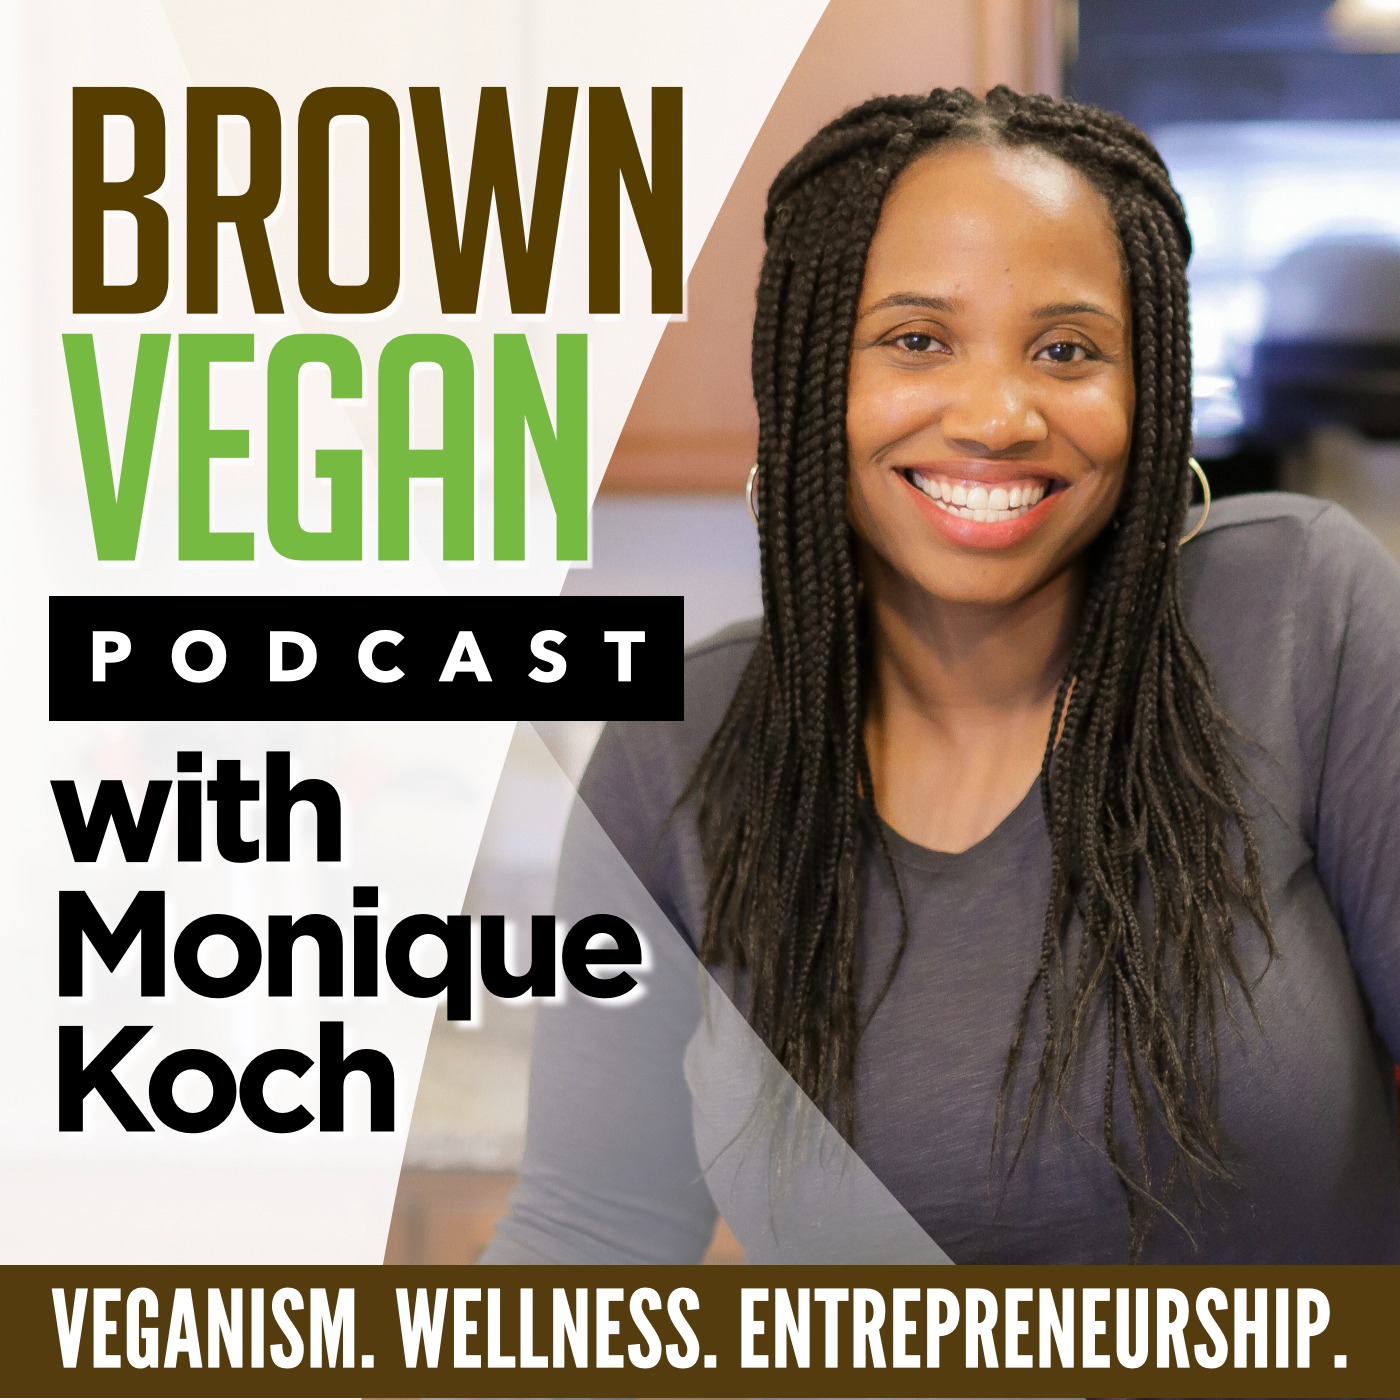 Making Health A Priority, Self-Love, & Building Confidence with The Cultivated Vegan